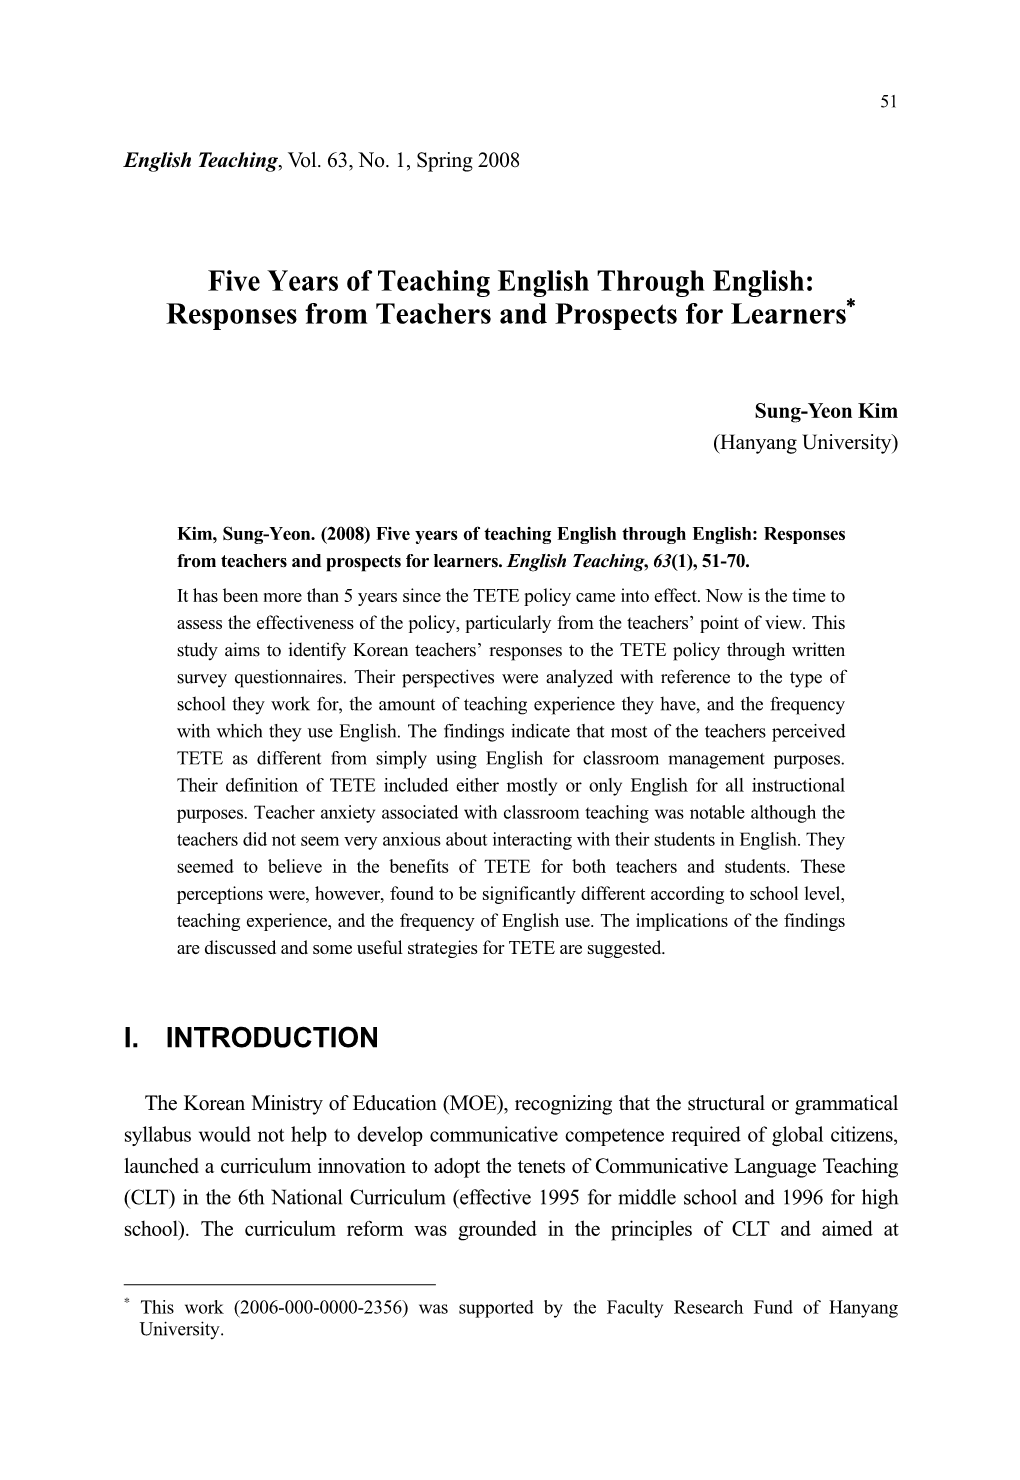 Five Years of Teaching English Through English: Responses from Teachers and Prospects for Learners